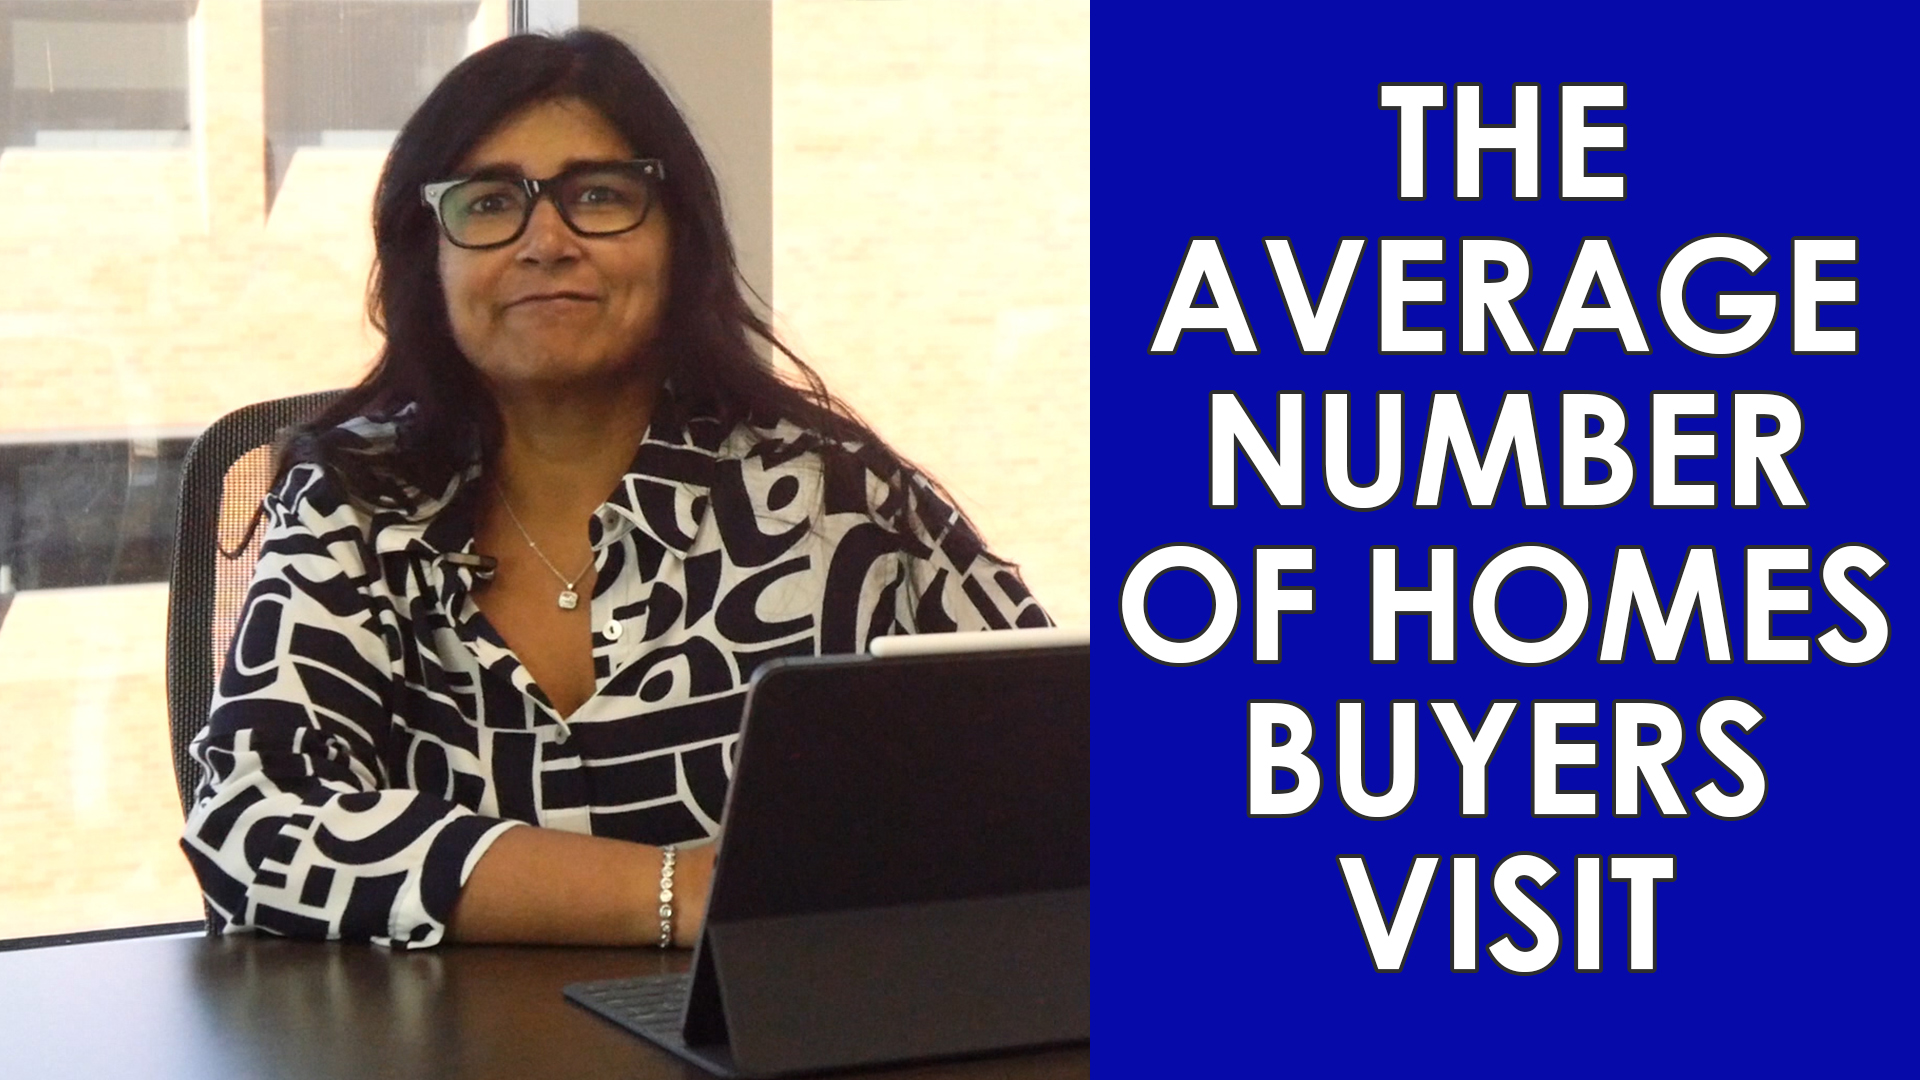 How Many Homes Do Buyers Look At Before Buying One?